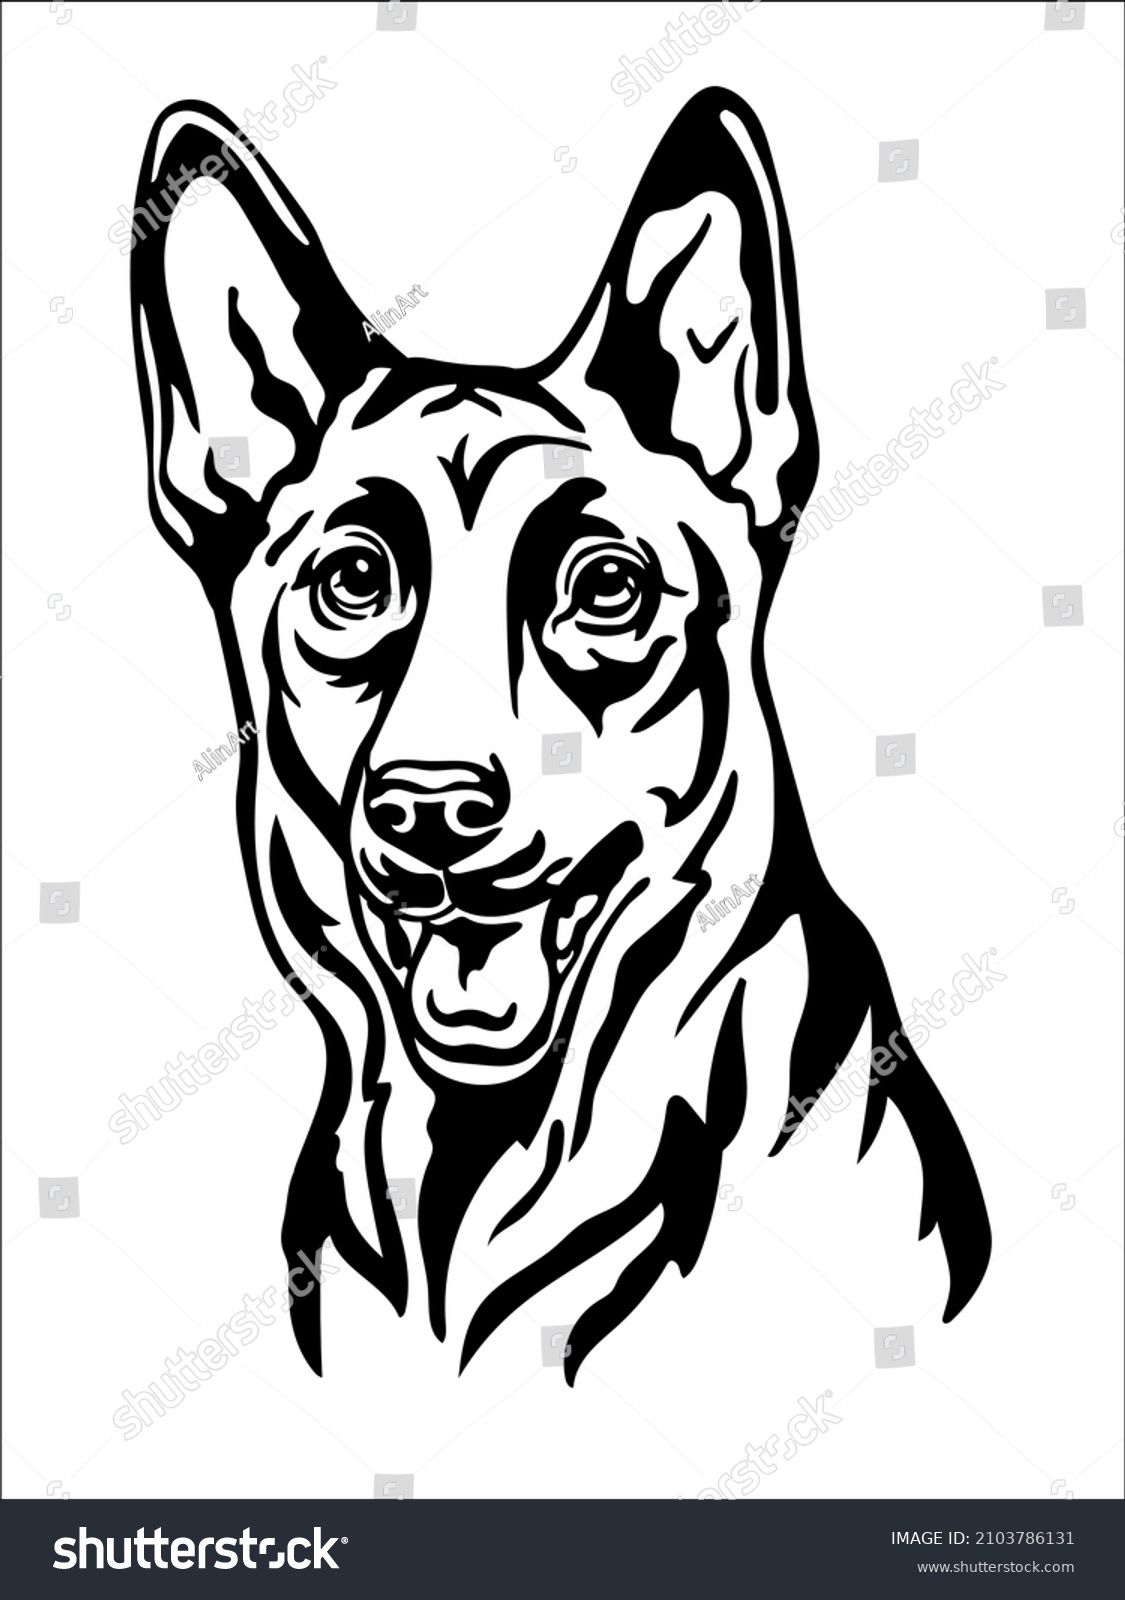 SVG of Belgian shepherd black contour portrait. Dog head in front view vector illustration isolated on white. For decor,embroidery, design, print, poster, postcard, sticker, t-shirt, cricut, tattoo svg